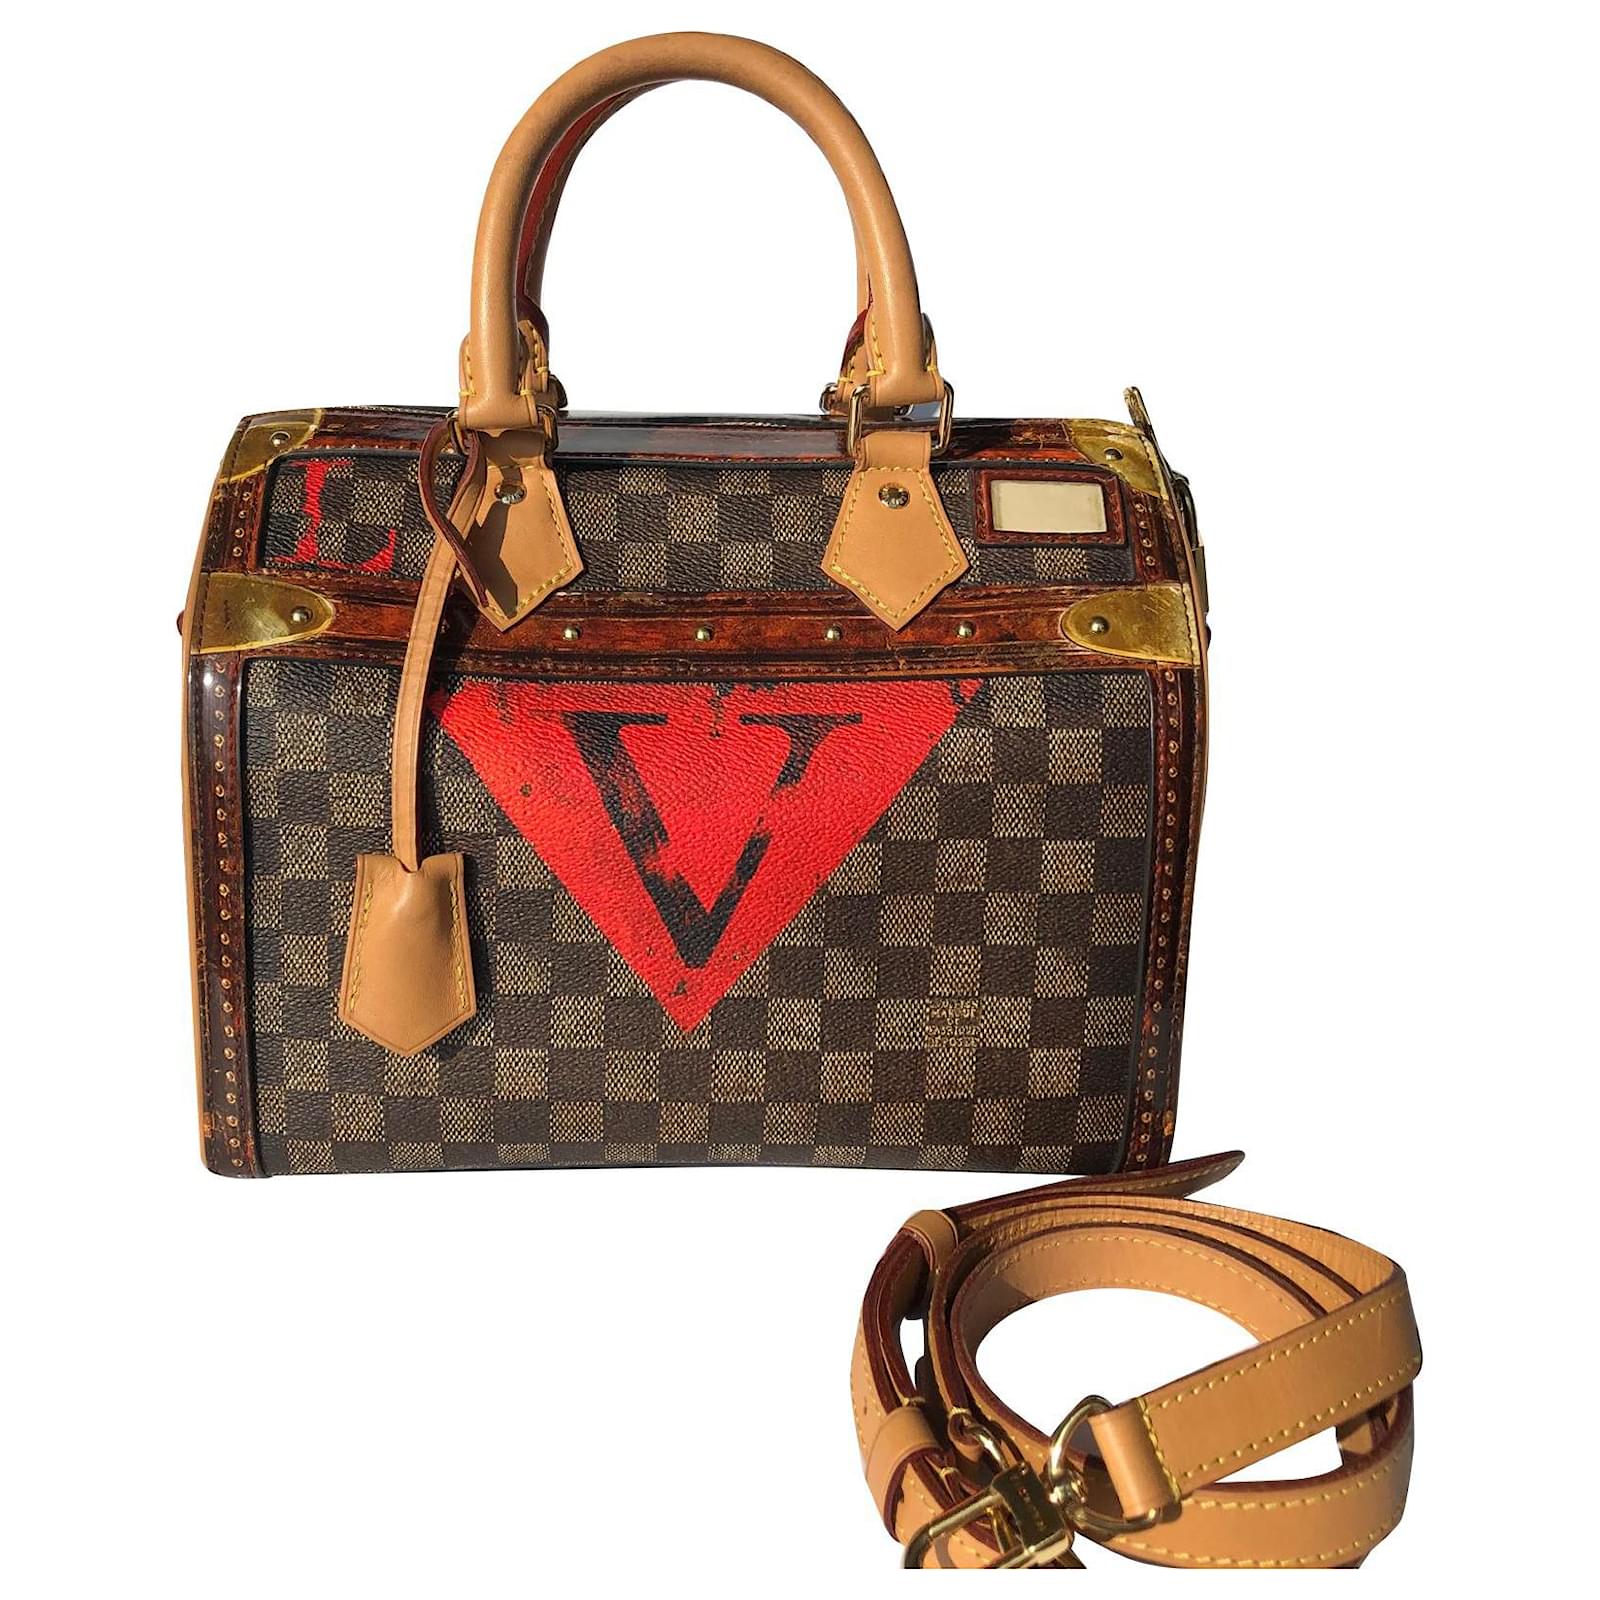 limited edition louis vuitton trunks and bags